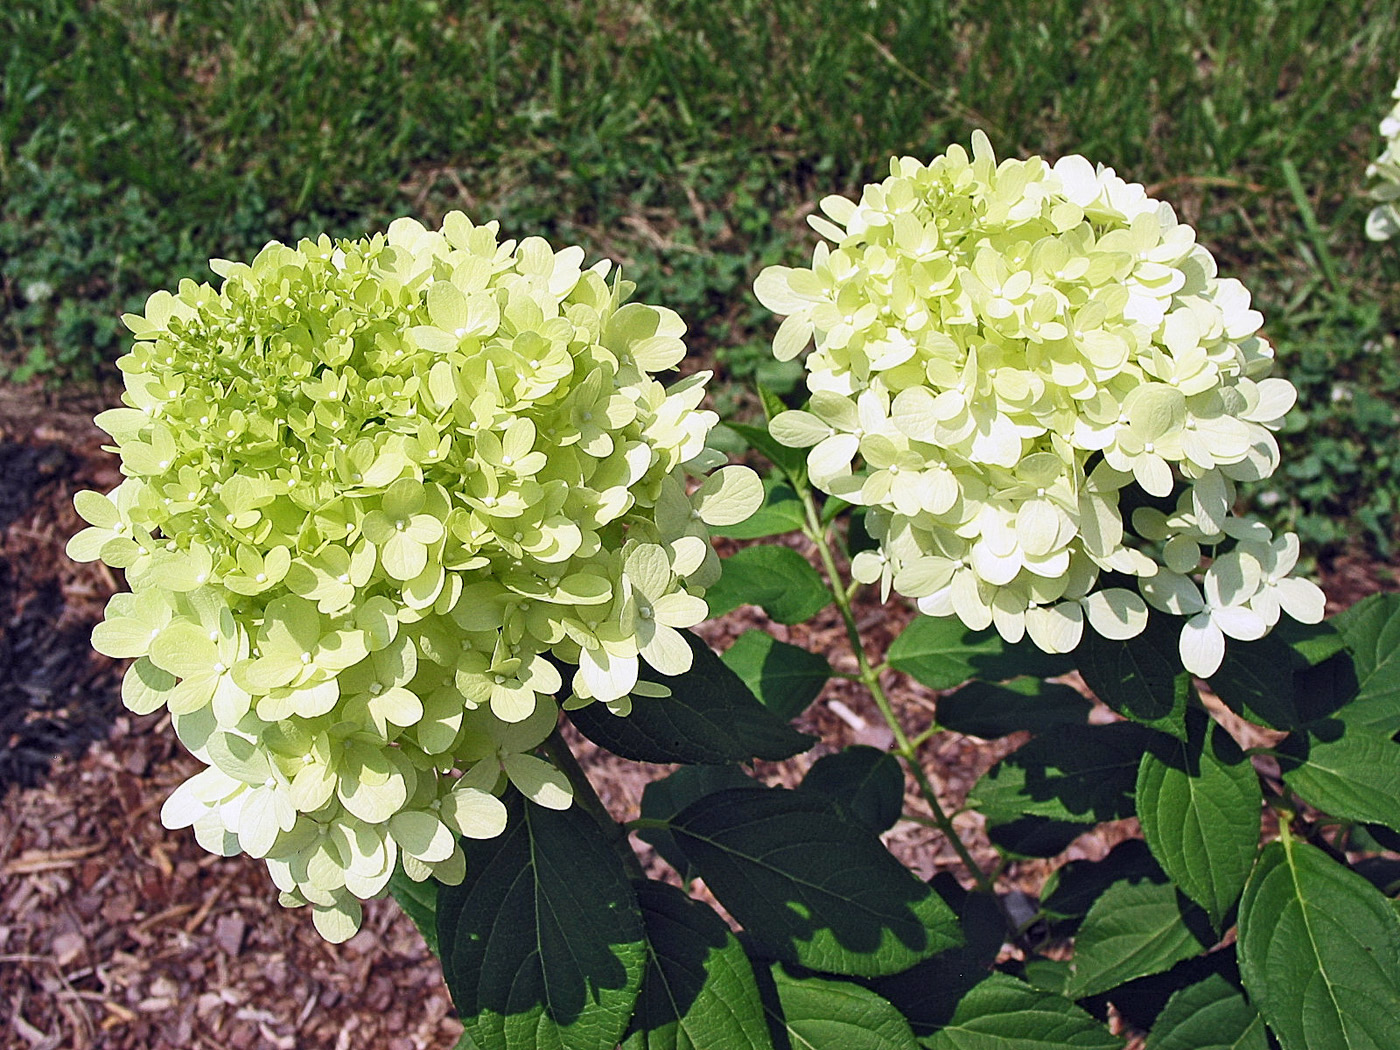 Limelight is a sun tolerant variety with a limegreen hue.